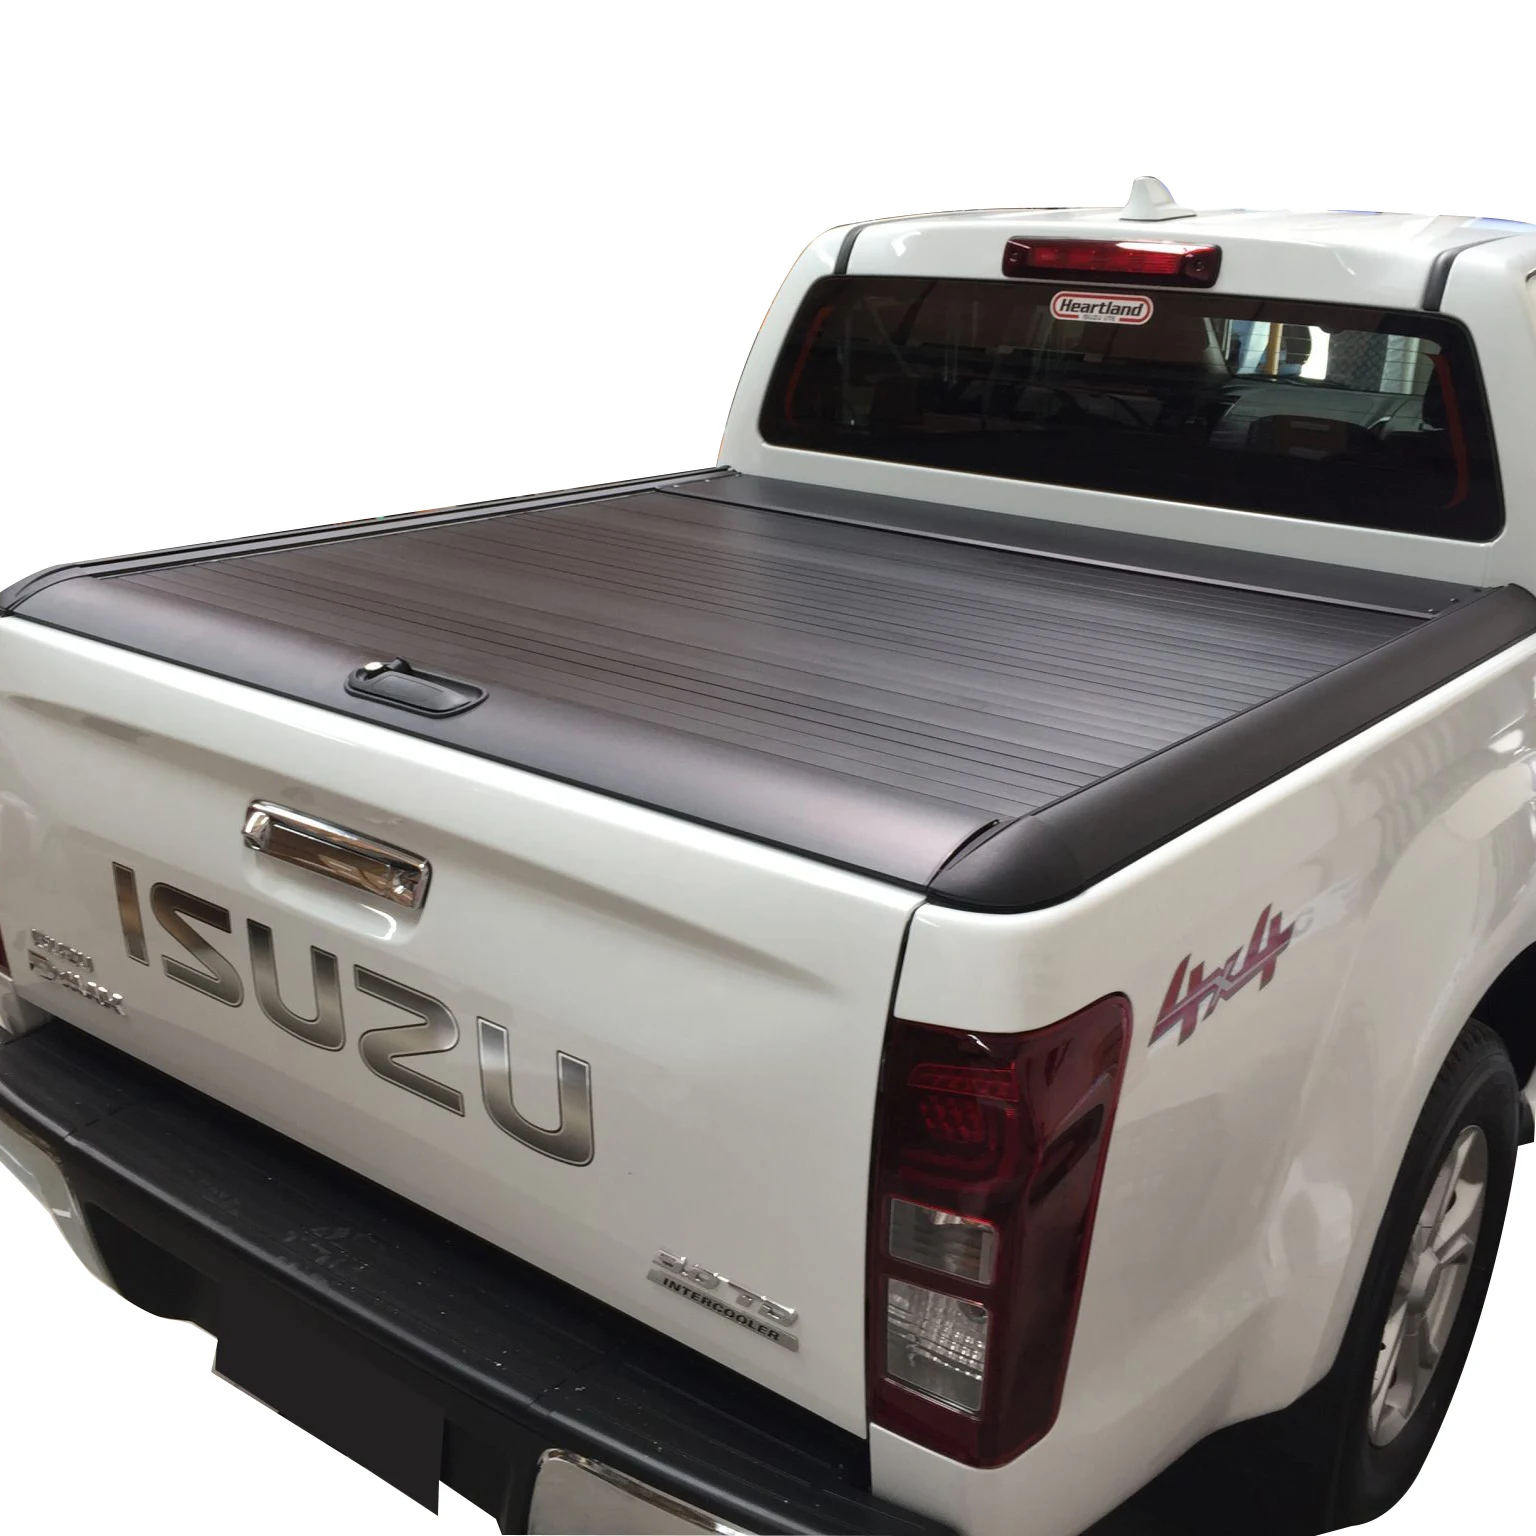 

High Quality 4x4 Pickup Truck Accessores Roller Lid Bed Cover Hard Tonneau Cover for GMC Sierra 1500 2500 3500